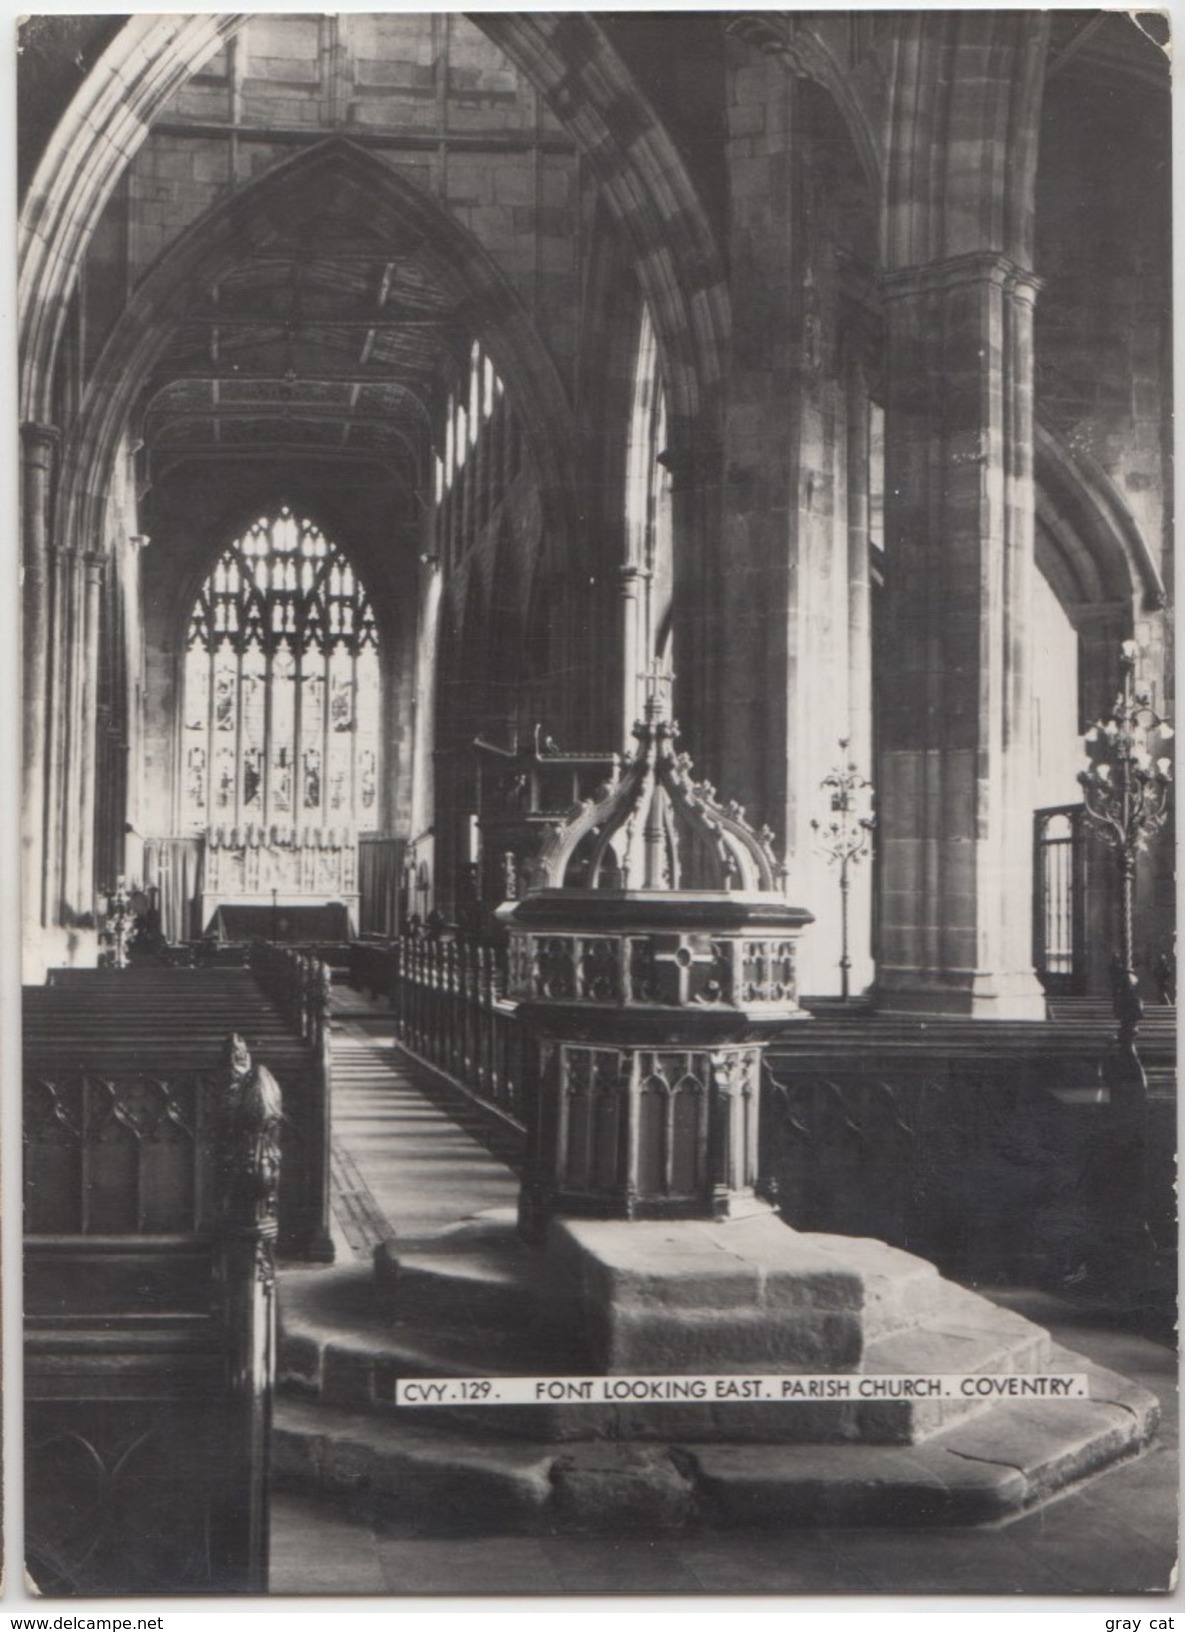 FONT LOOKING EAST, PARISH CHURCH, COVENTRY, United Kingdom, Real Photo Postcard [20666] - Coventry